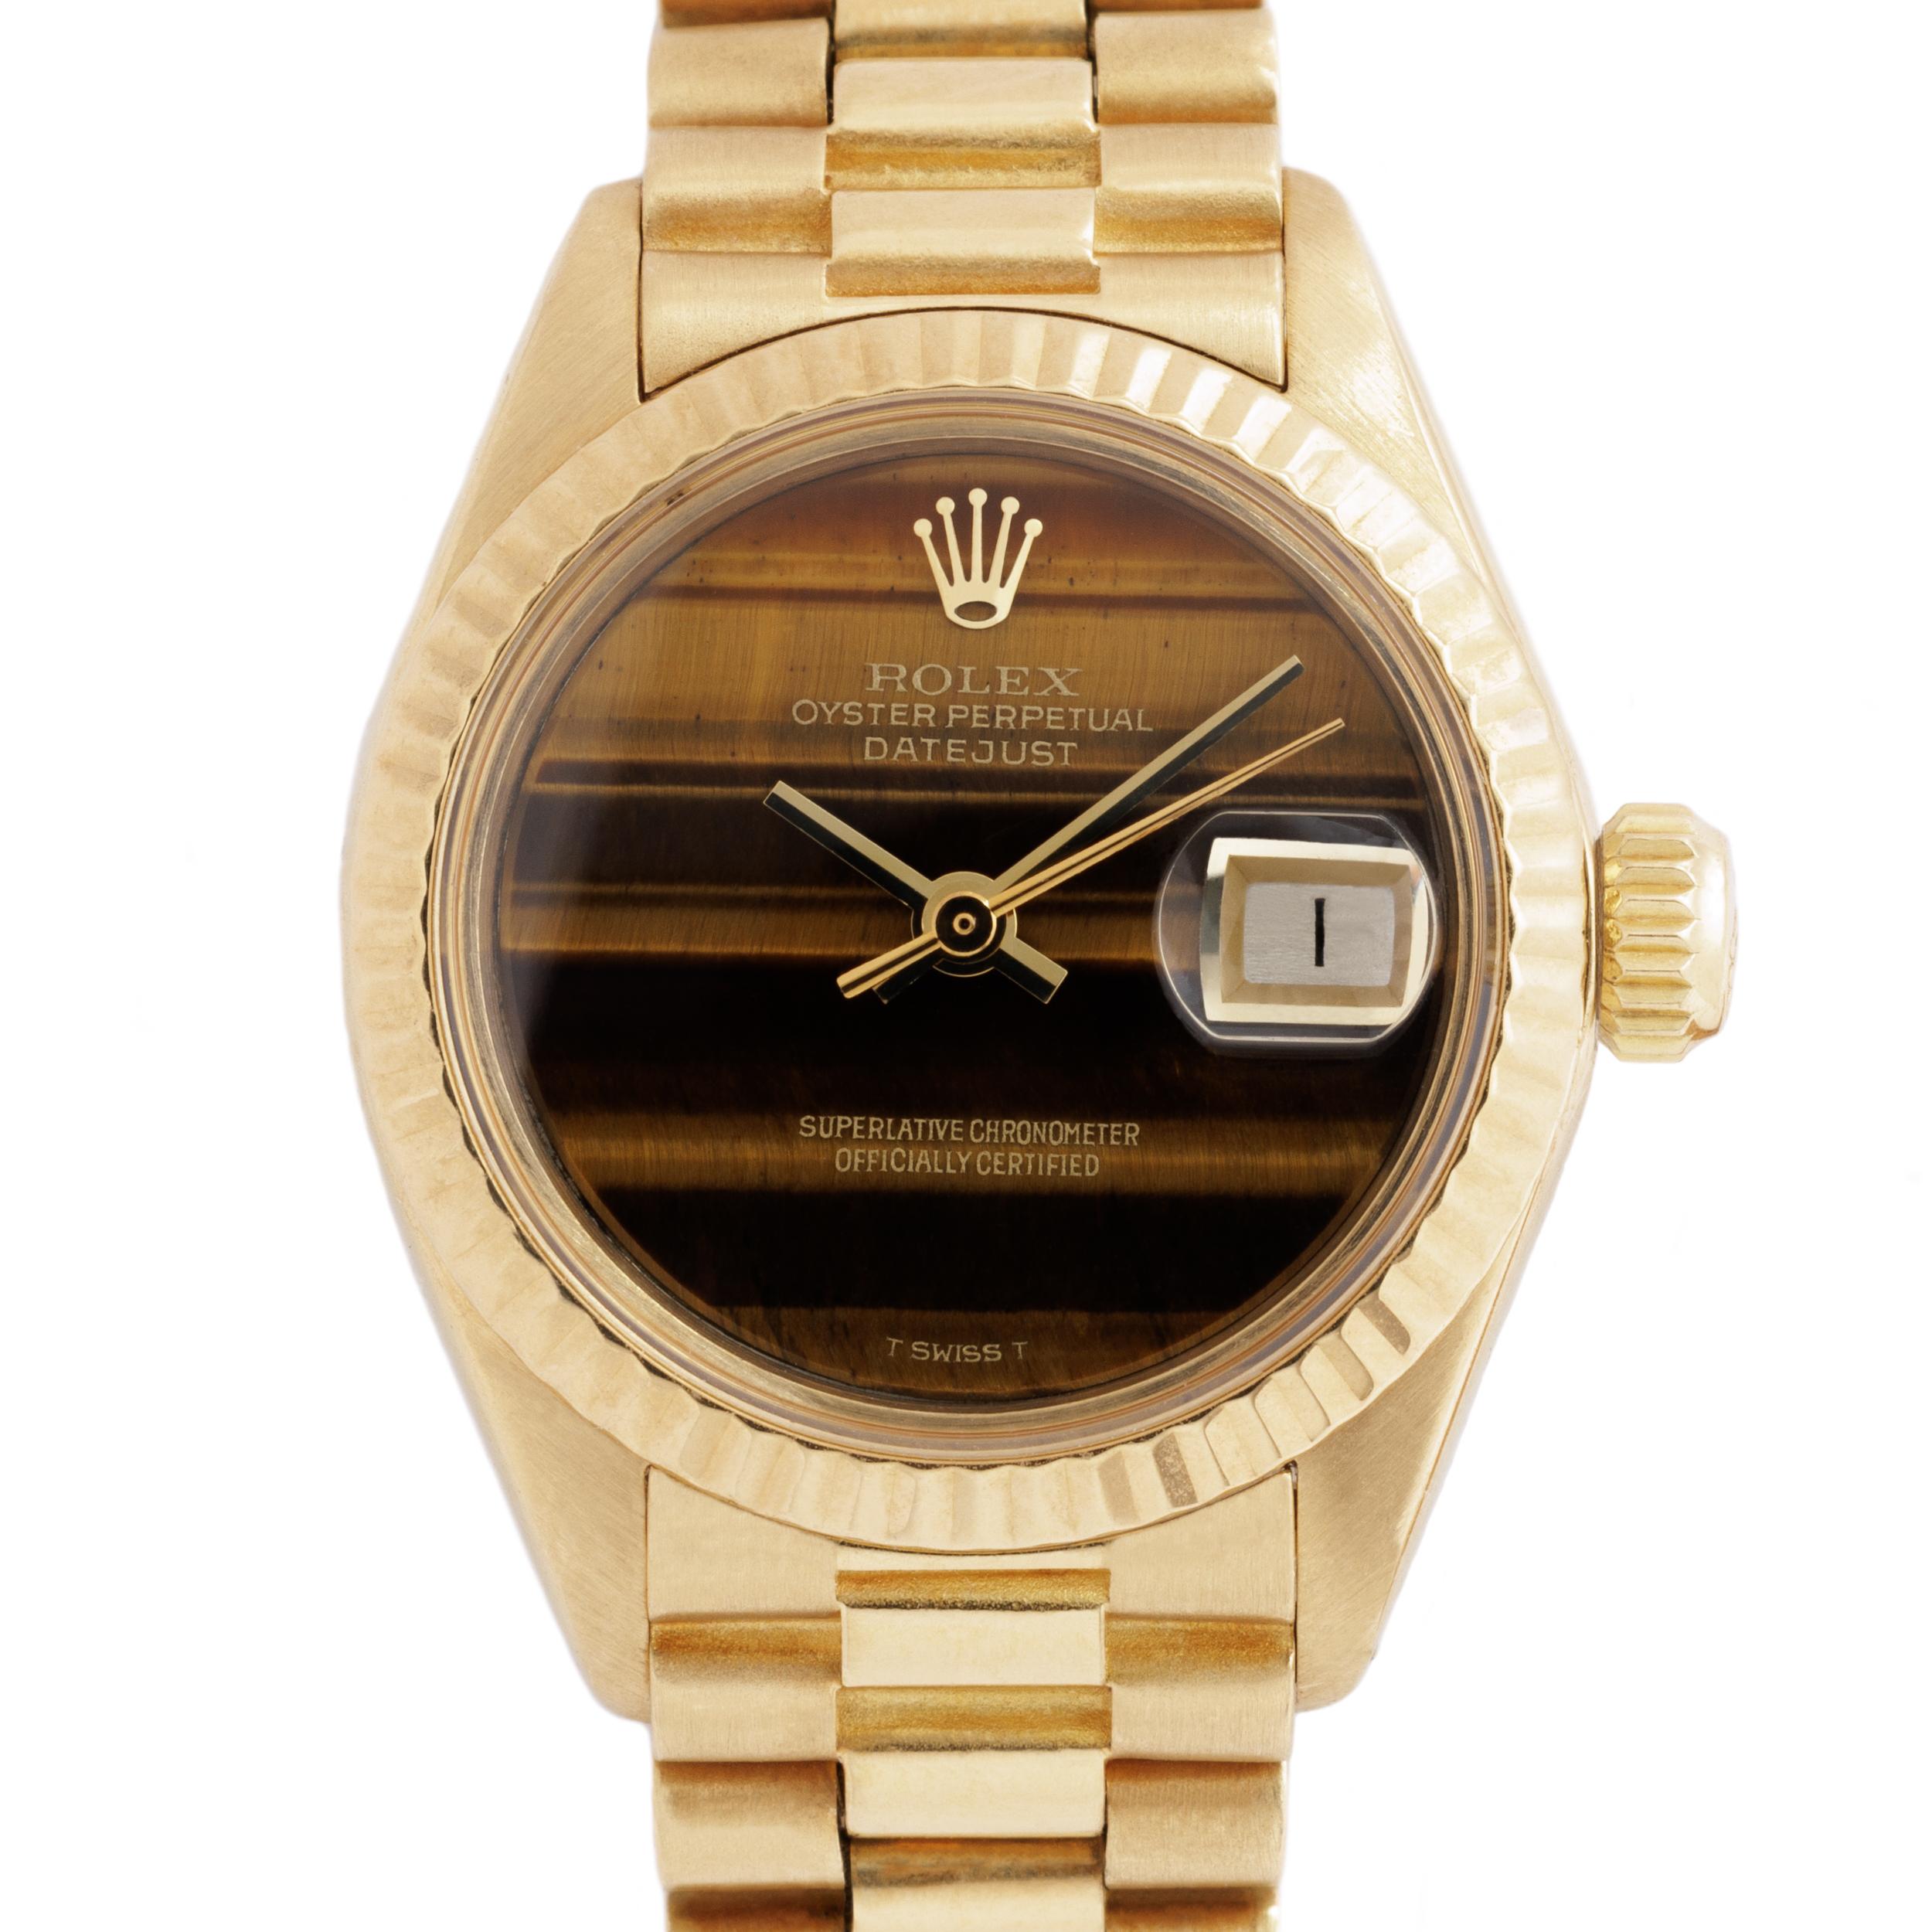 1976 Rolex 18 Karat Yellow Gold DateJust Model 69178

Vintage Rolex 18 Karat Yellow Gold Ladies DateJust with a RARE and original Rolex Tiger Eye's eye dial 
circa 1976
26mm Dial
Automatic movement

Currently fits up to a 7